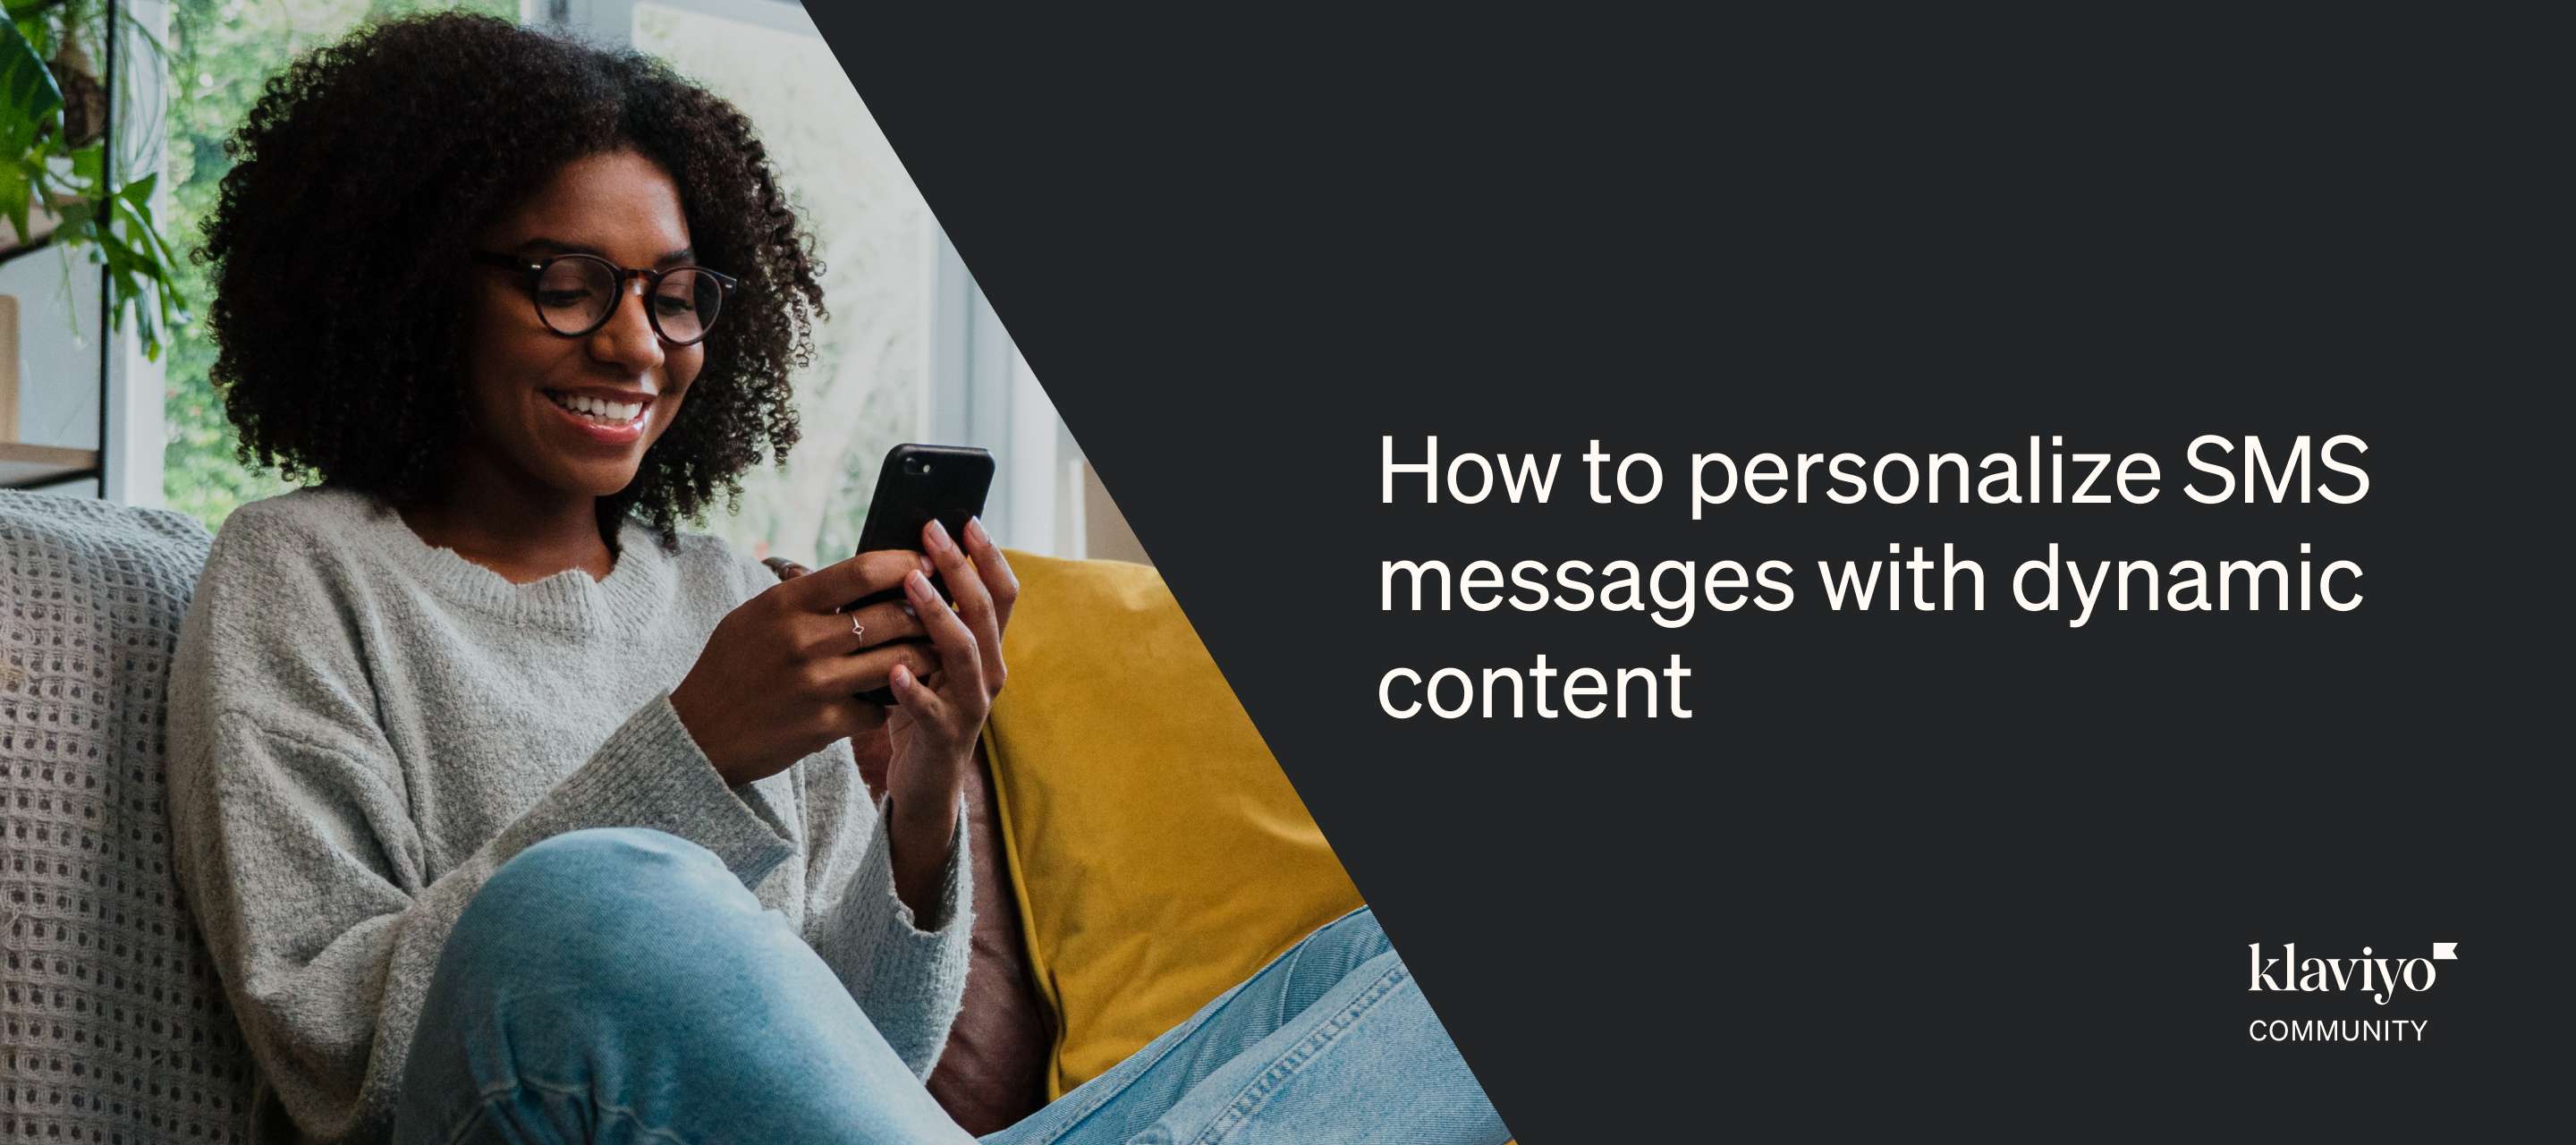 How to personalize SMS messages with dynamic content